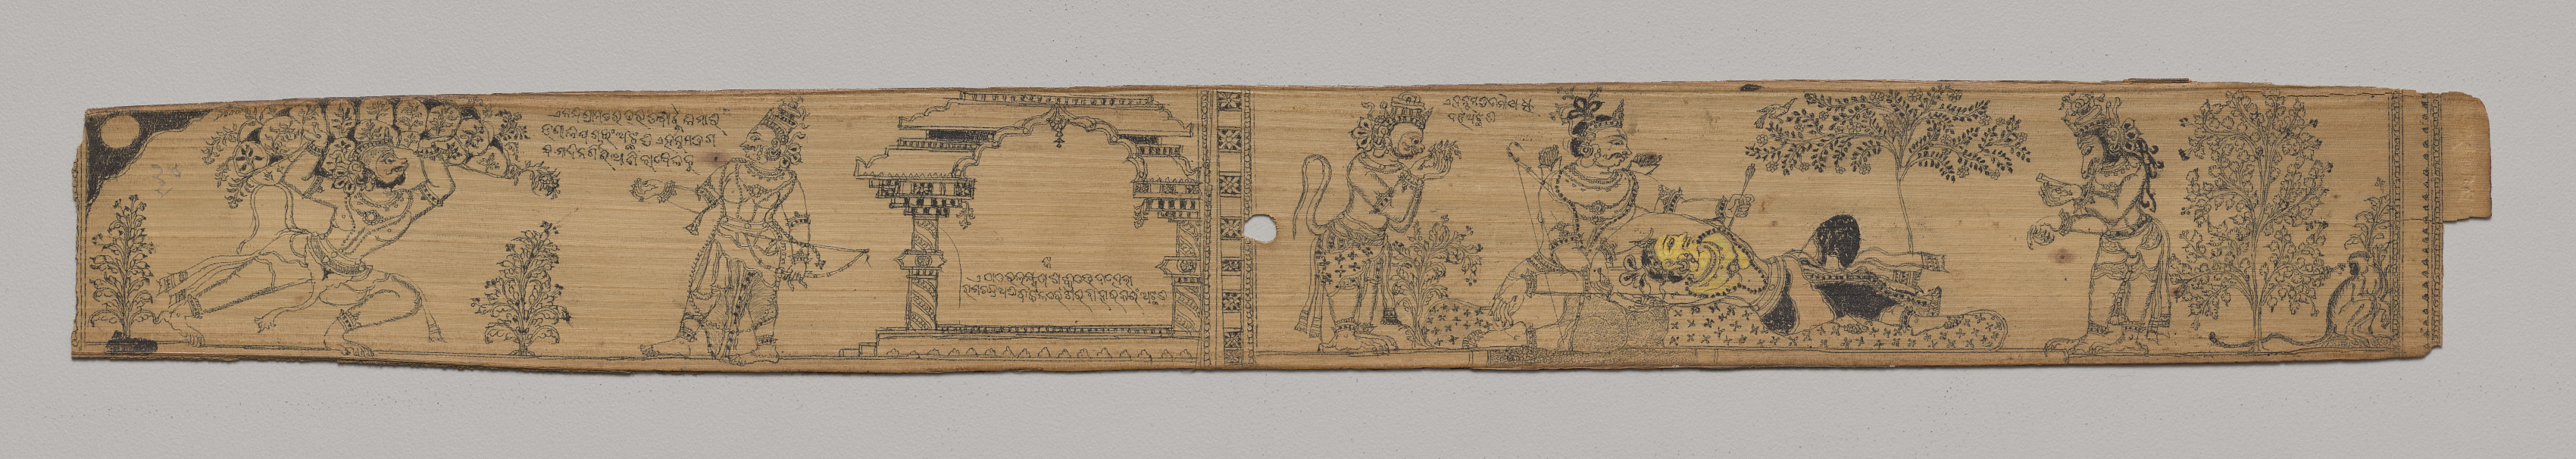 Hanuman Brings the Mountain of Healing Plants; Rama Extracts the Arrow from Lakshmana as Hanuman and a Bear Prepare to Treat Him (recto), from a Romance of Chandrabhanu and Lavanyavati of Upendra Bhanja (Indian, died 1740)